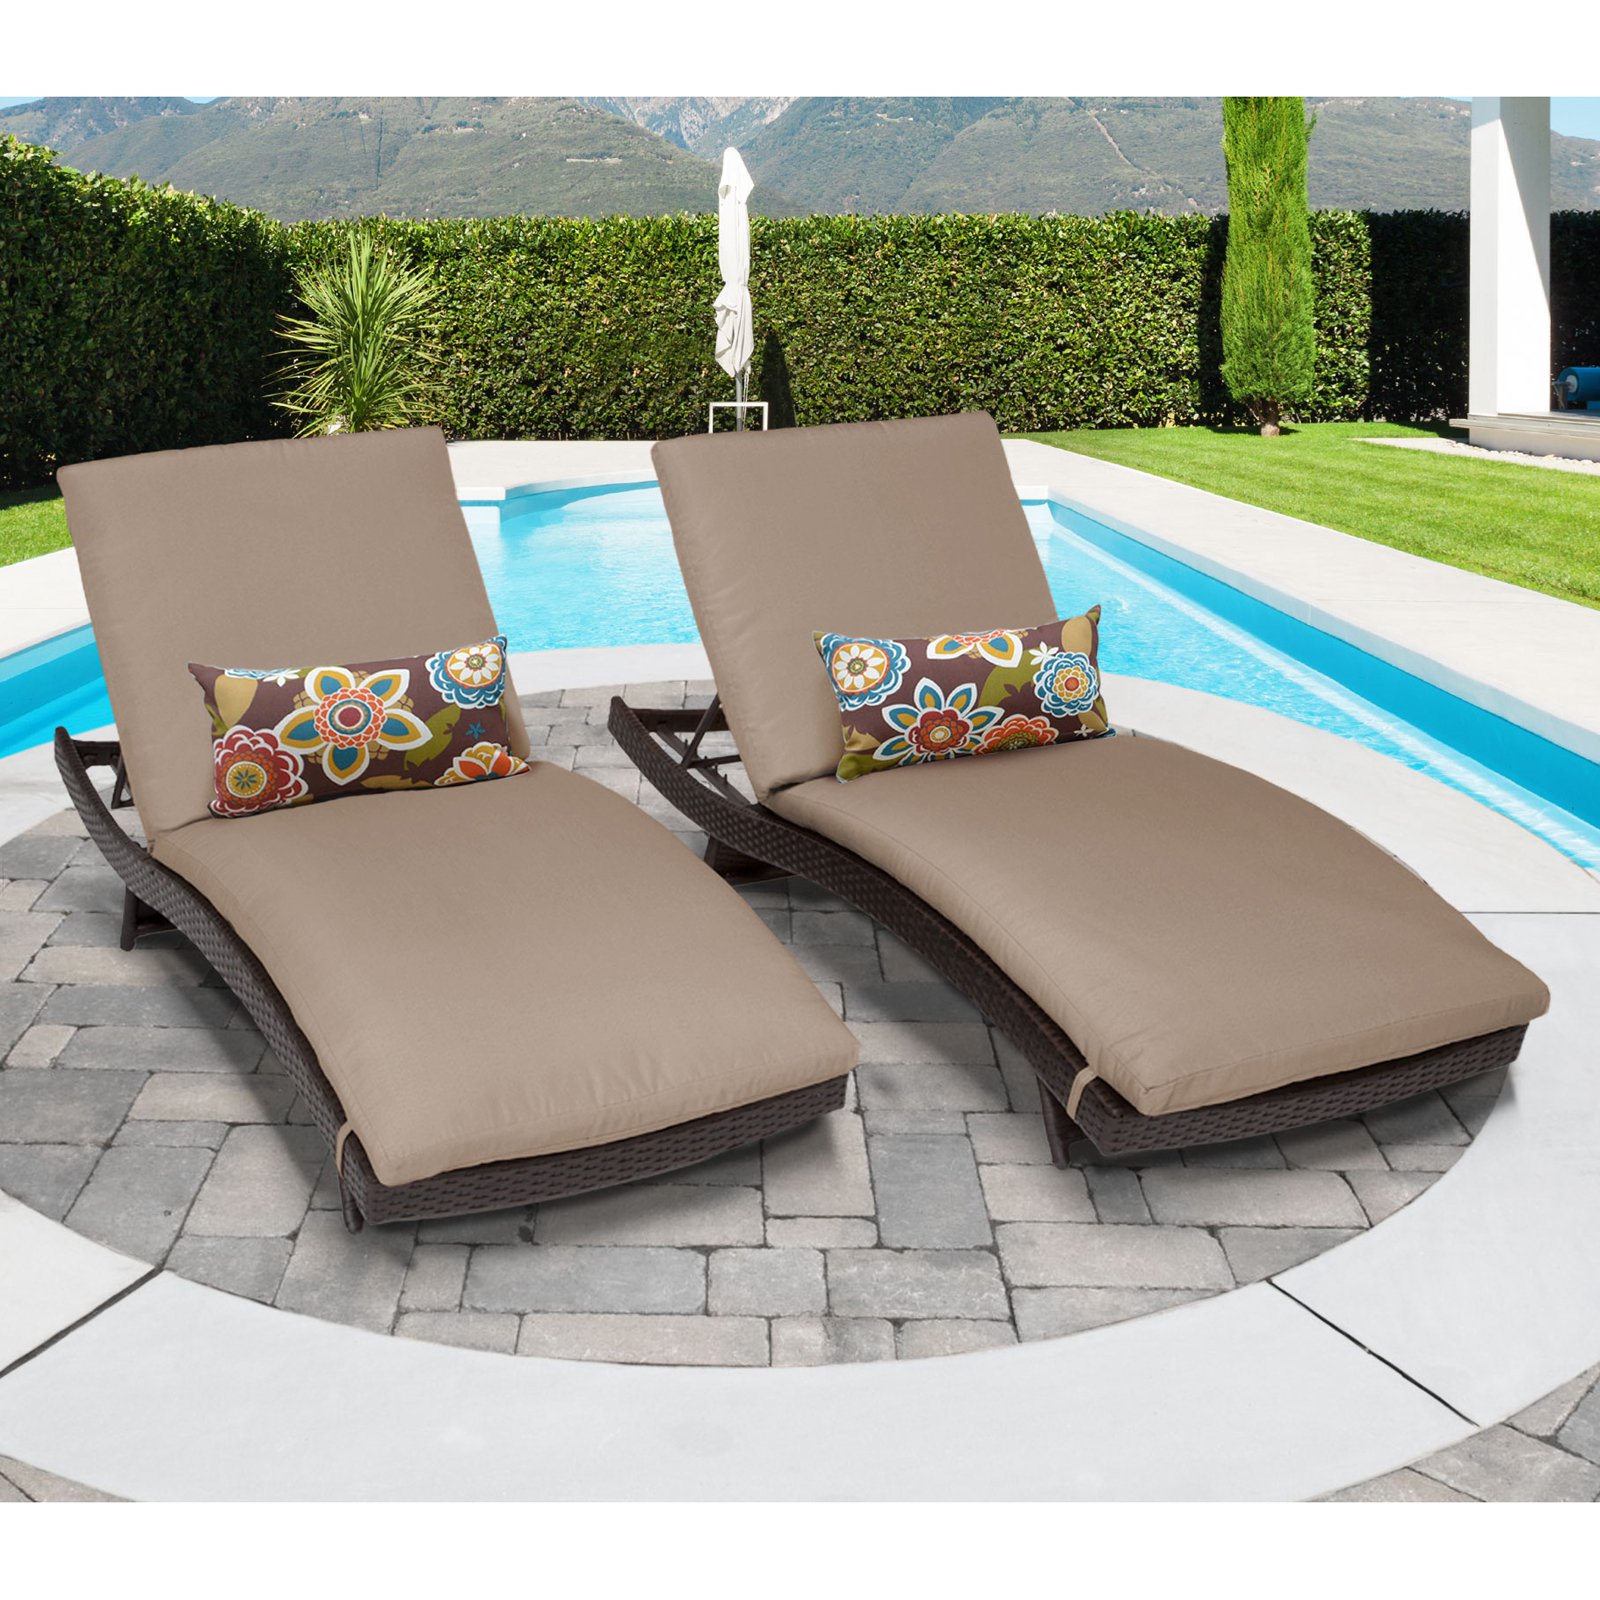 Barbados Curved Chaise Outdoor Wicker Patio Furniture in White (Set of 2) - image 3 of 4